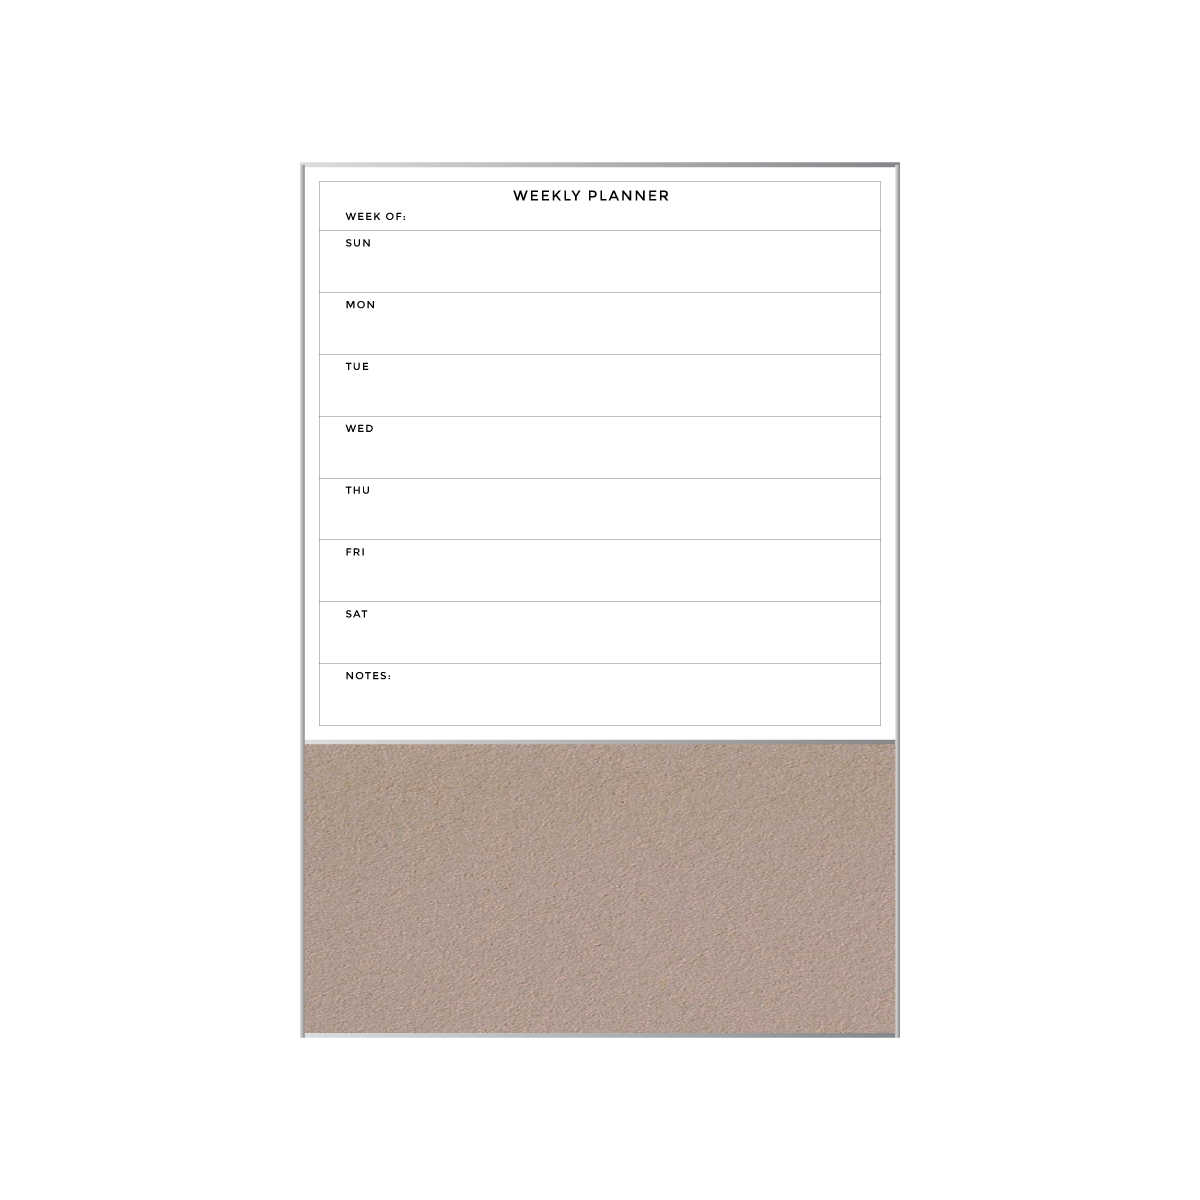 Combination Weekly Planner | Brown Rice FORBO | Satin Aluminum Minimalist Frame Portrait